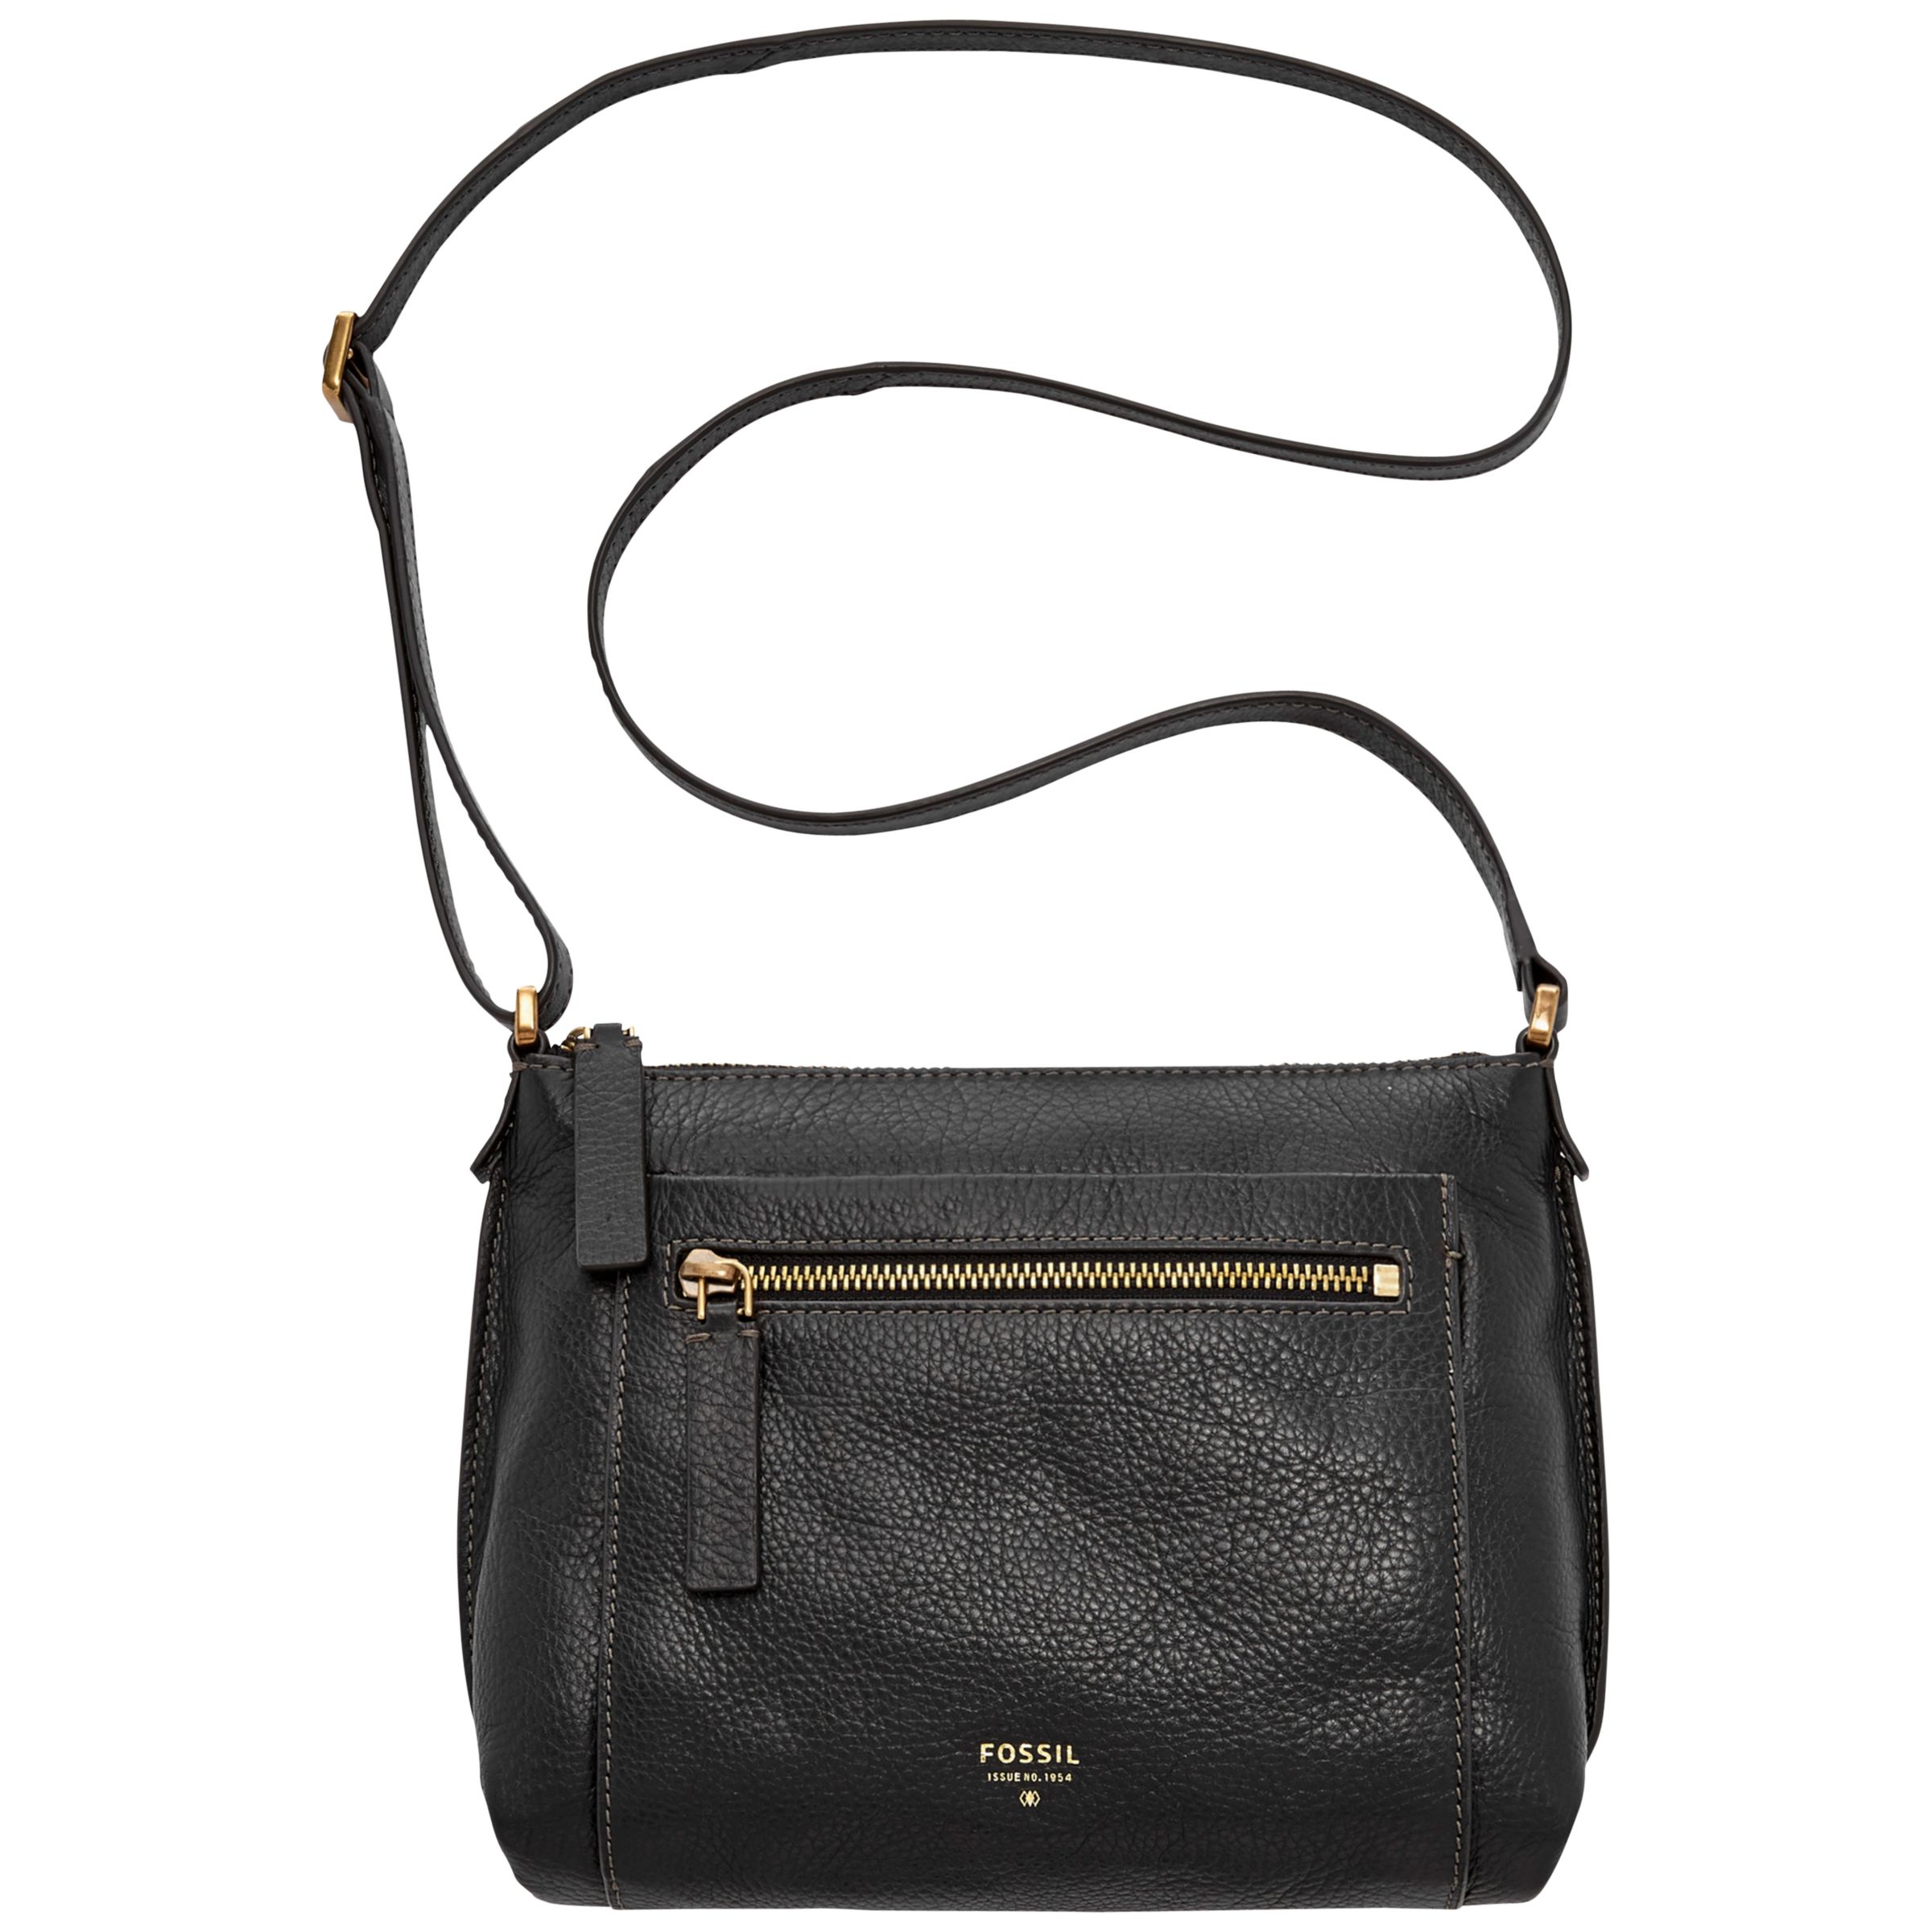 Fossil Vickery Cross Body Leather Bag at John Lewis & Partners